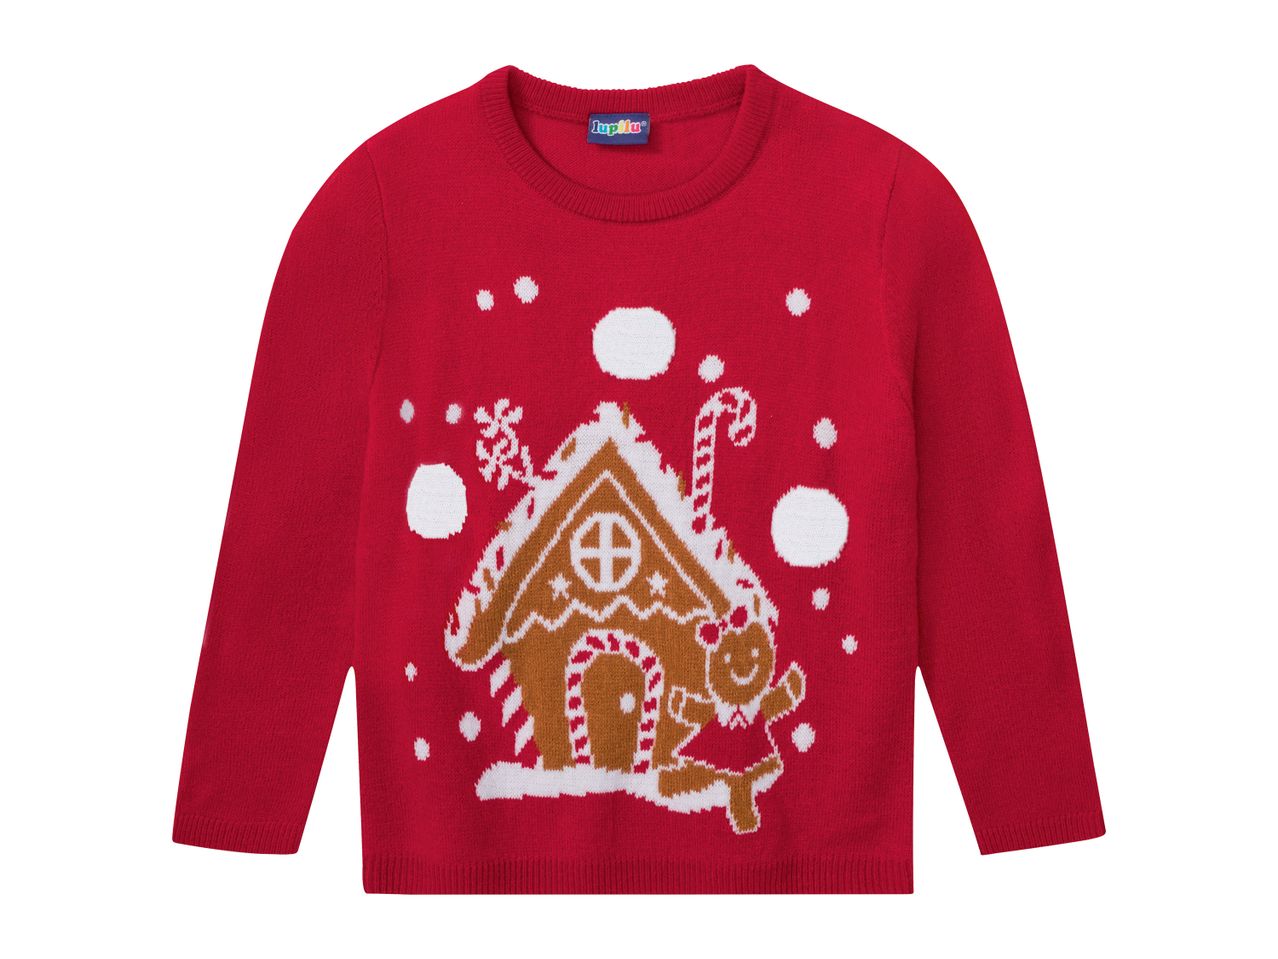 Go to full screen view: Lupilu Younger Kids’ Light-Up Christmas Jumper - Image 3